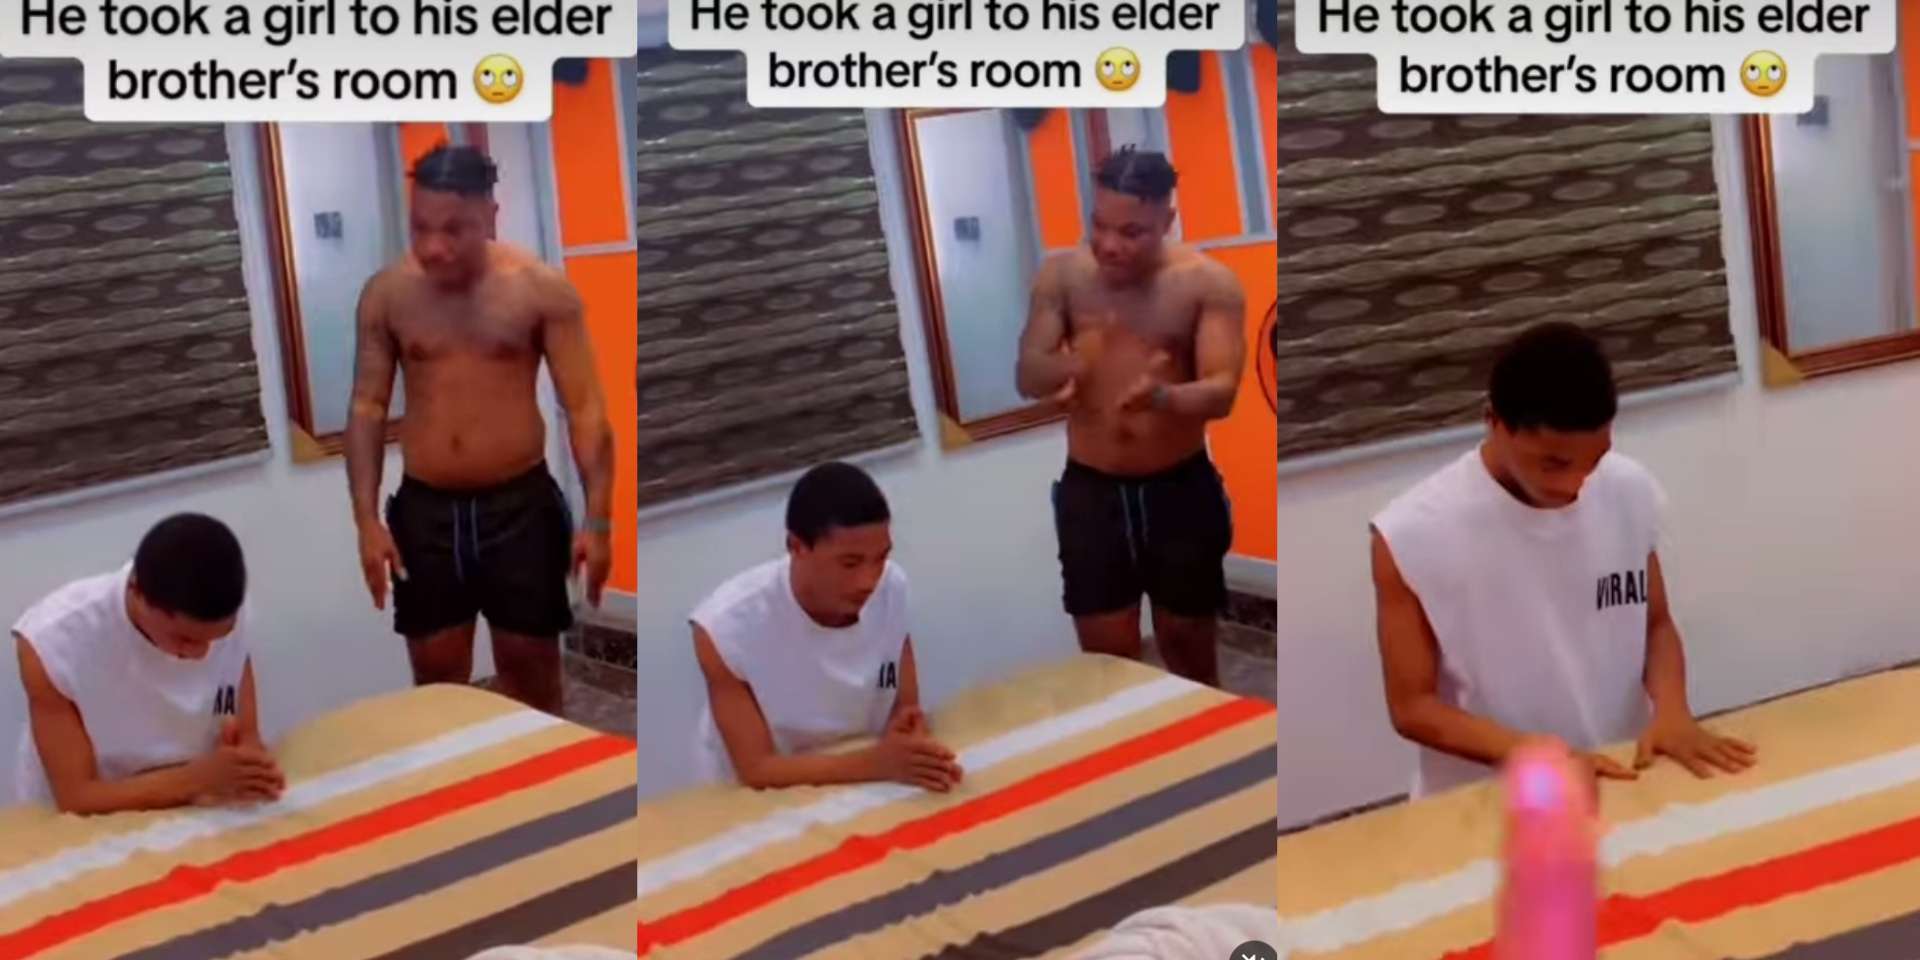 Man blows hot after catching junior brother with lady on his bed [Video]